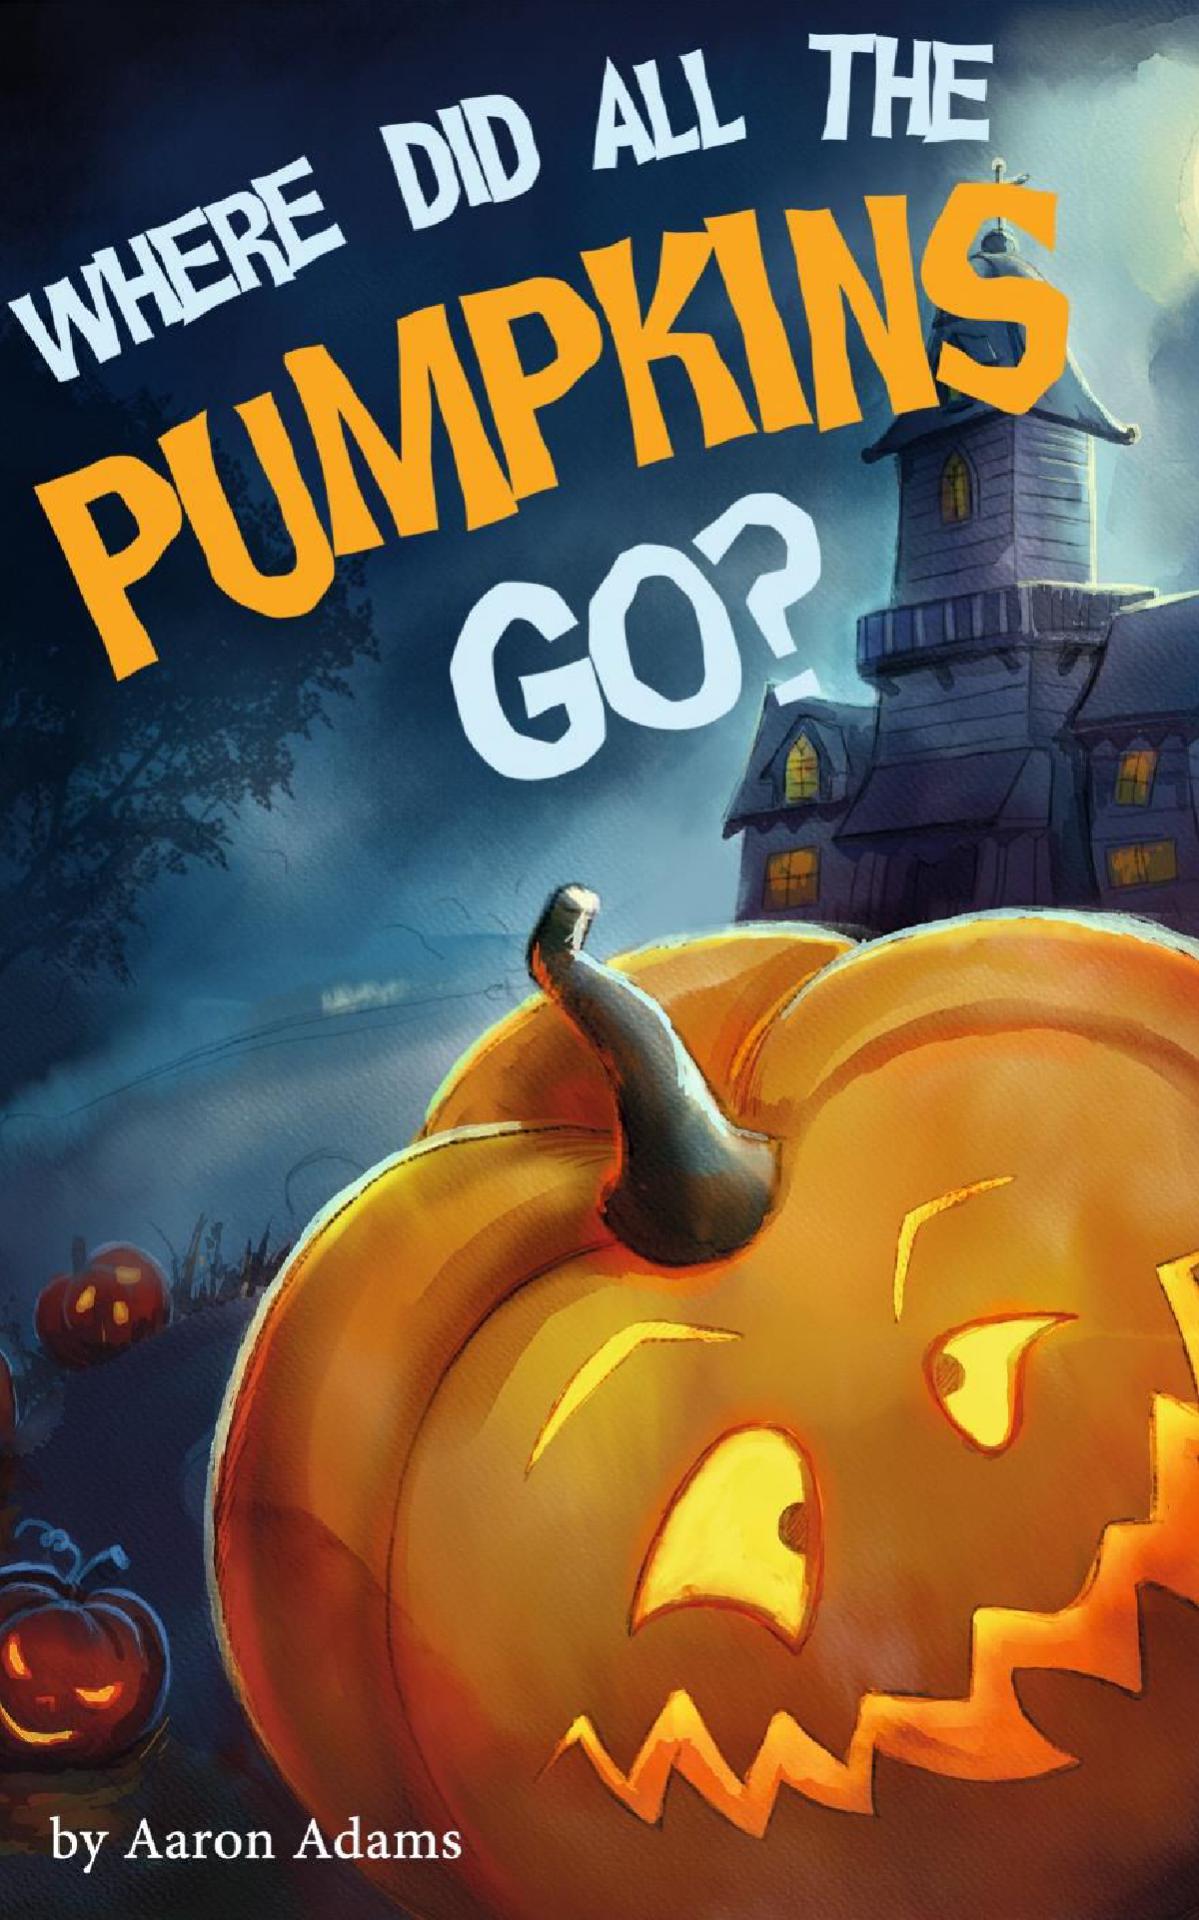 FREE: Where did all the pumpkins go? by Aaron Adams